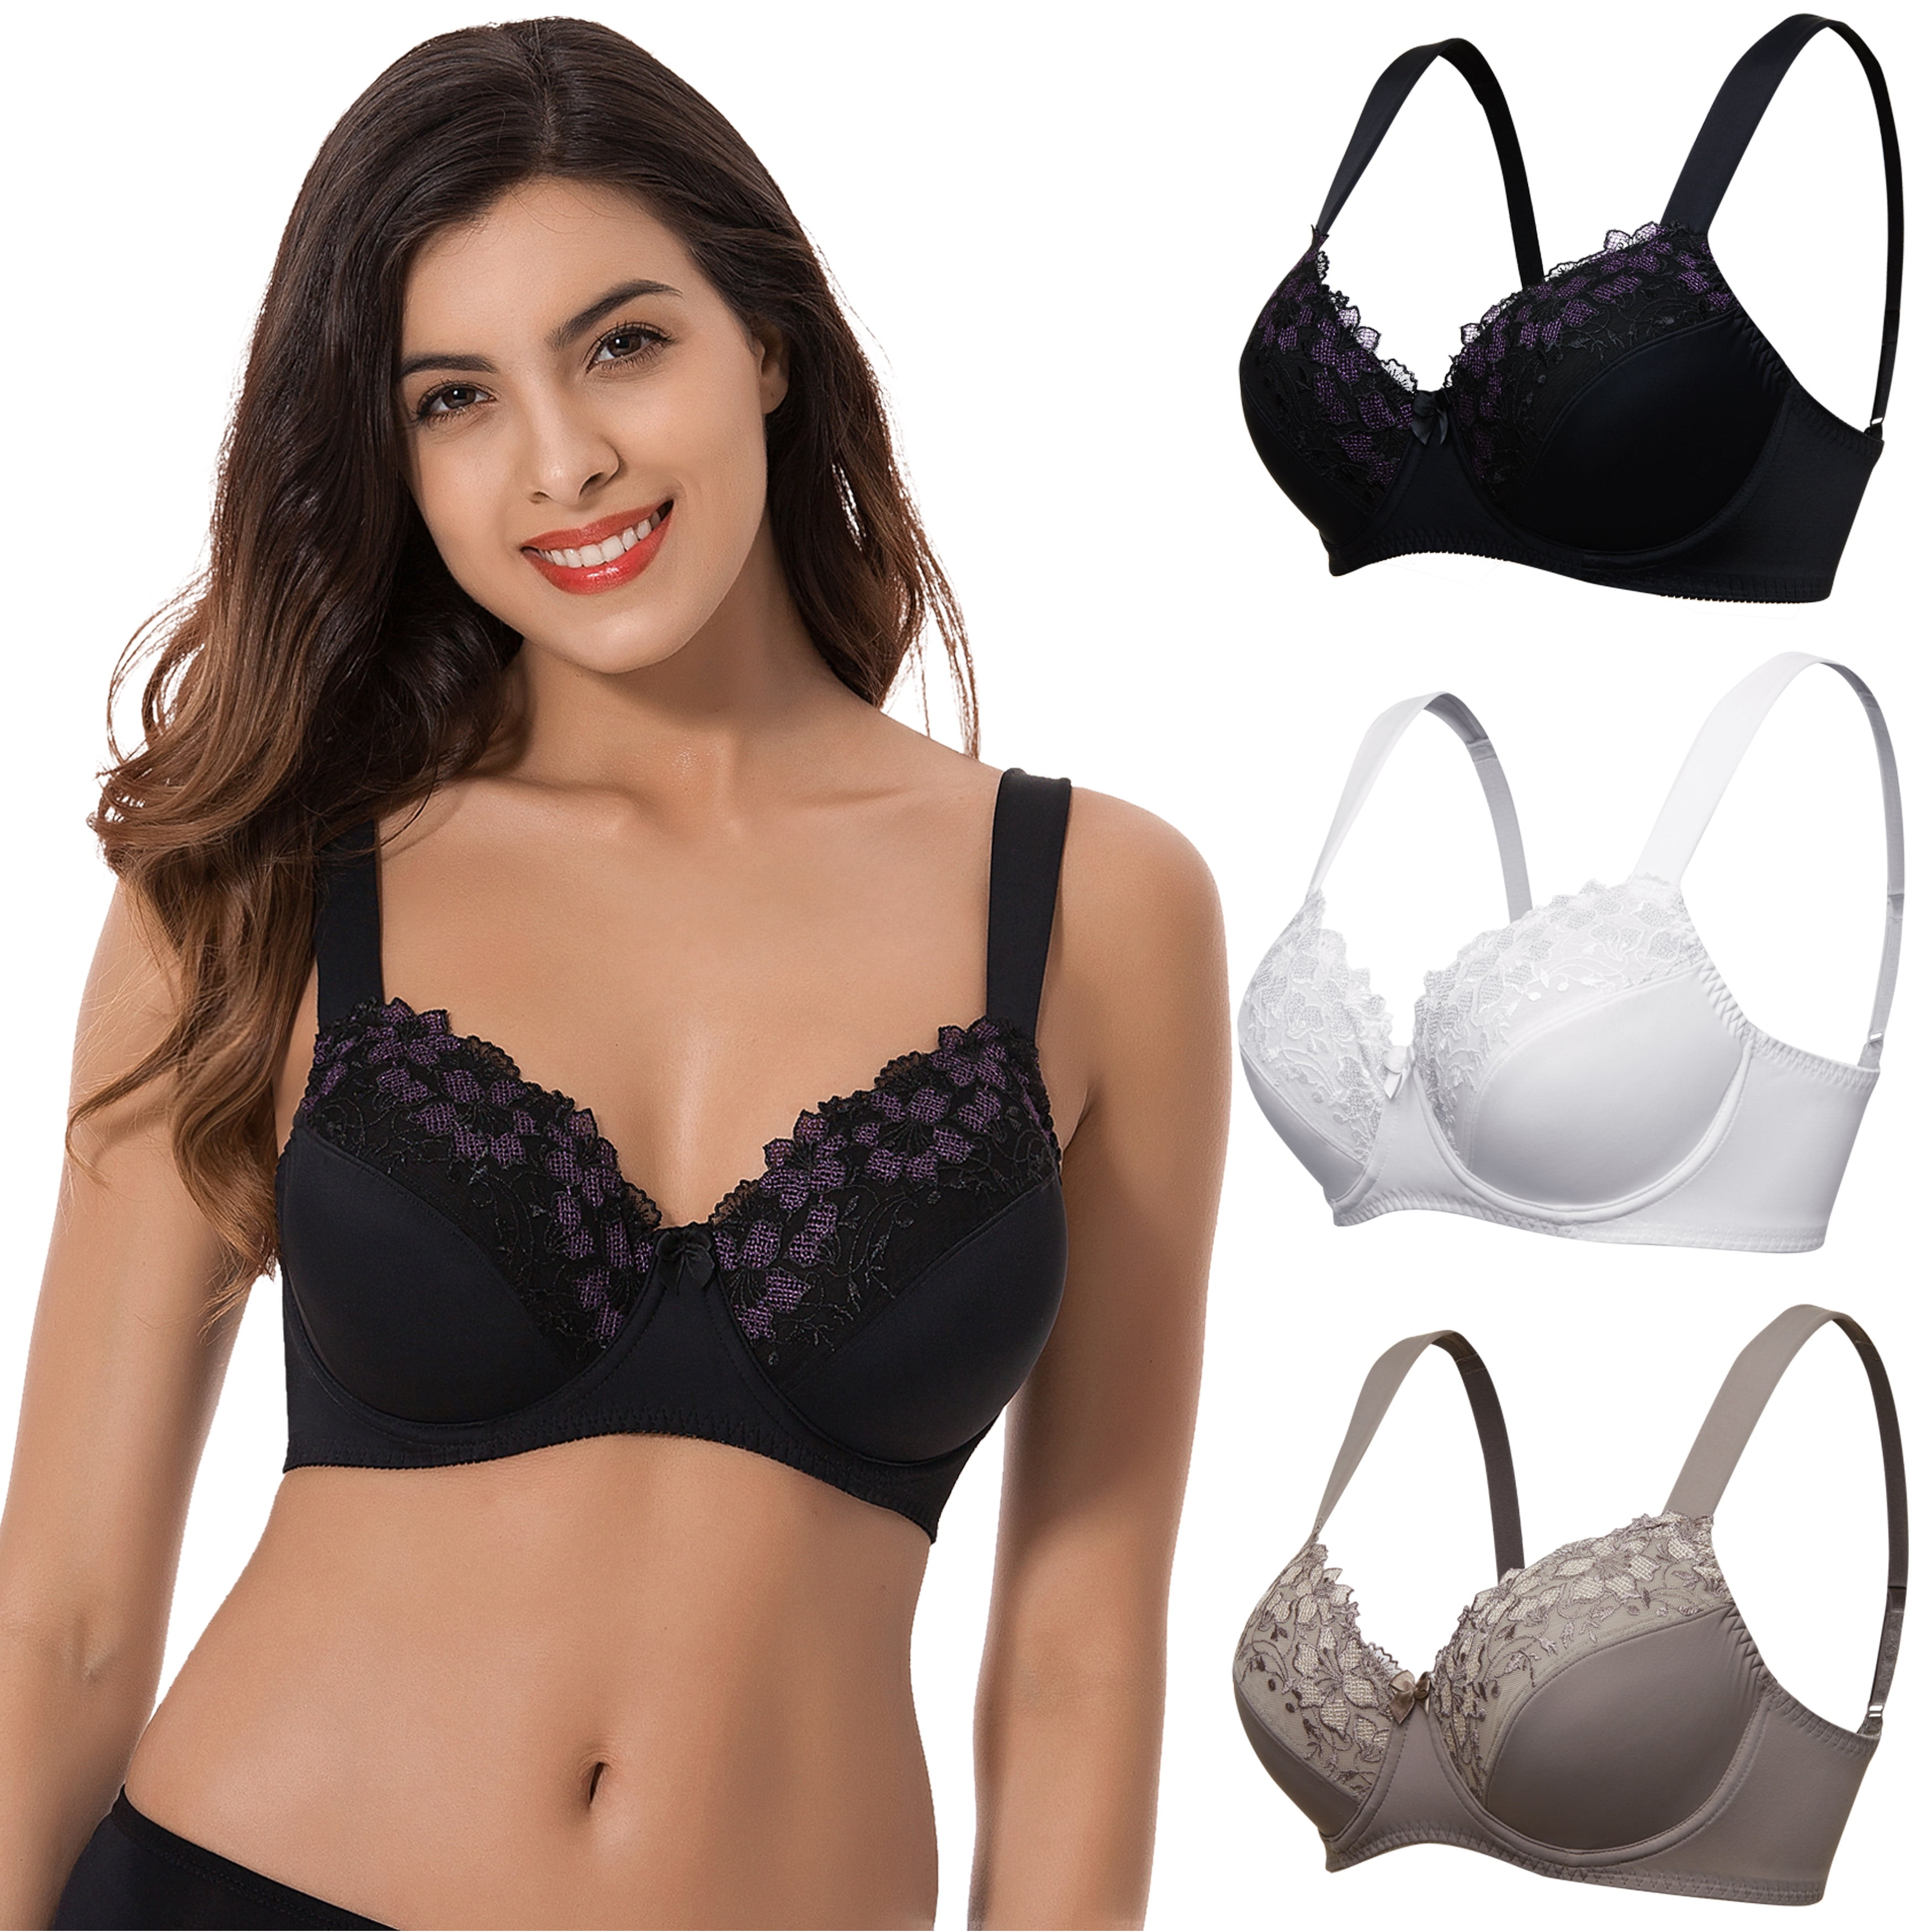 Curve Muse Women's Plus Size Unlined Underwire Lace Bra with Cushion Straps-2PK 